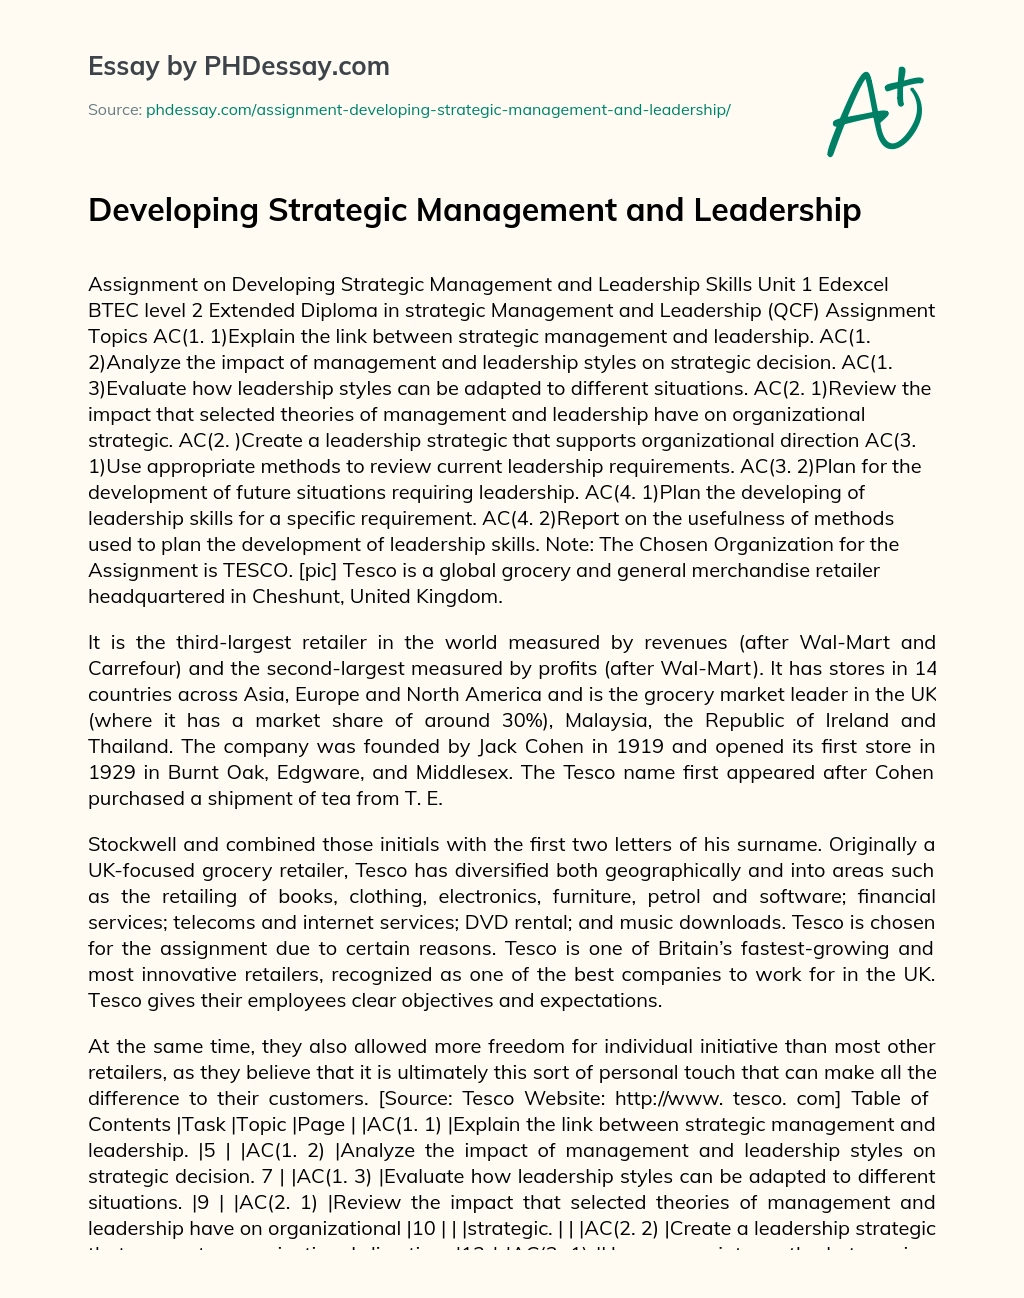 Developing Strategic Management and Leadership essay